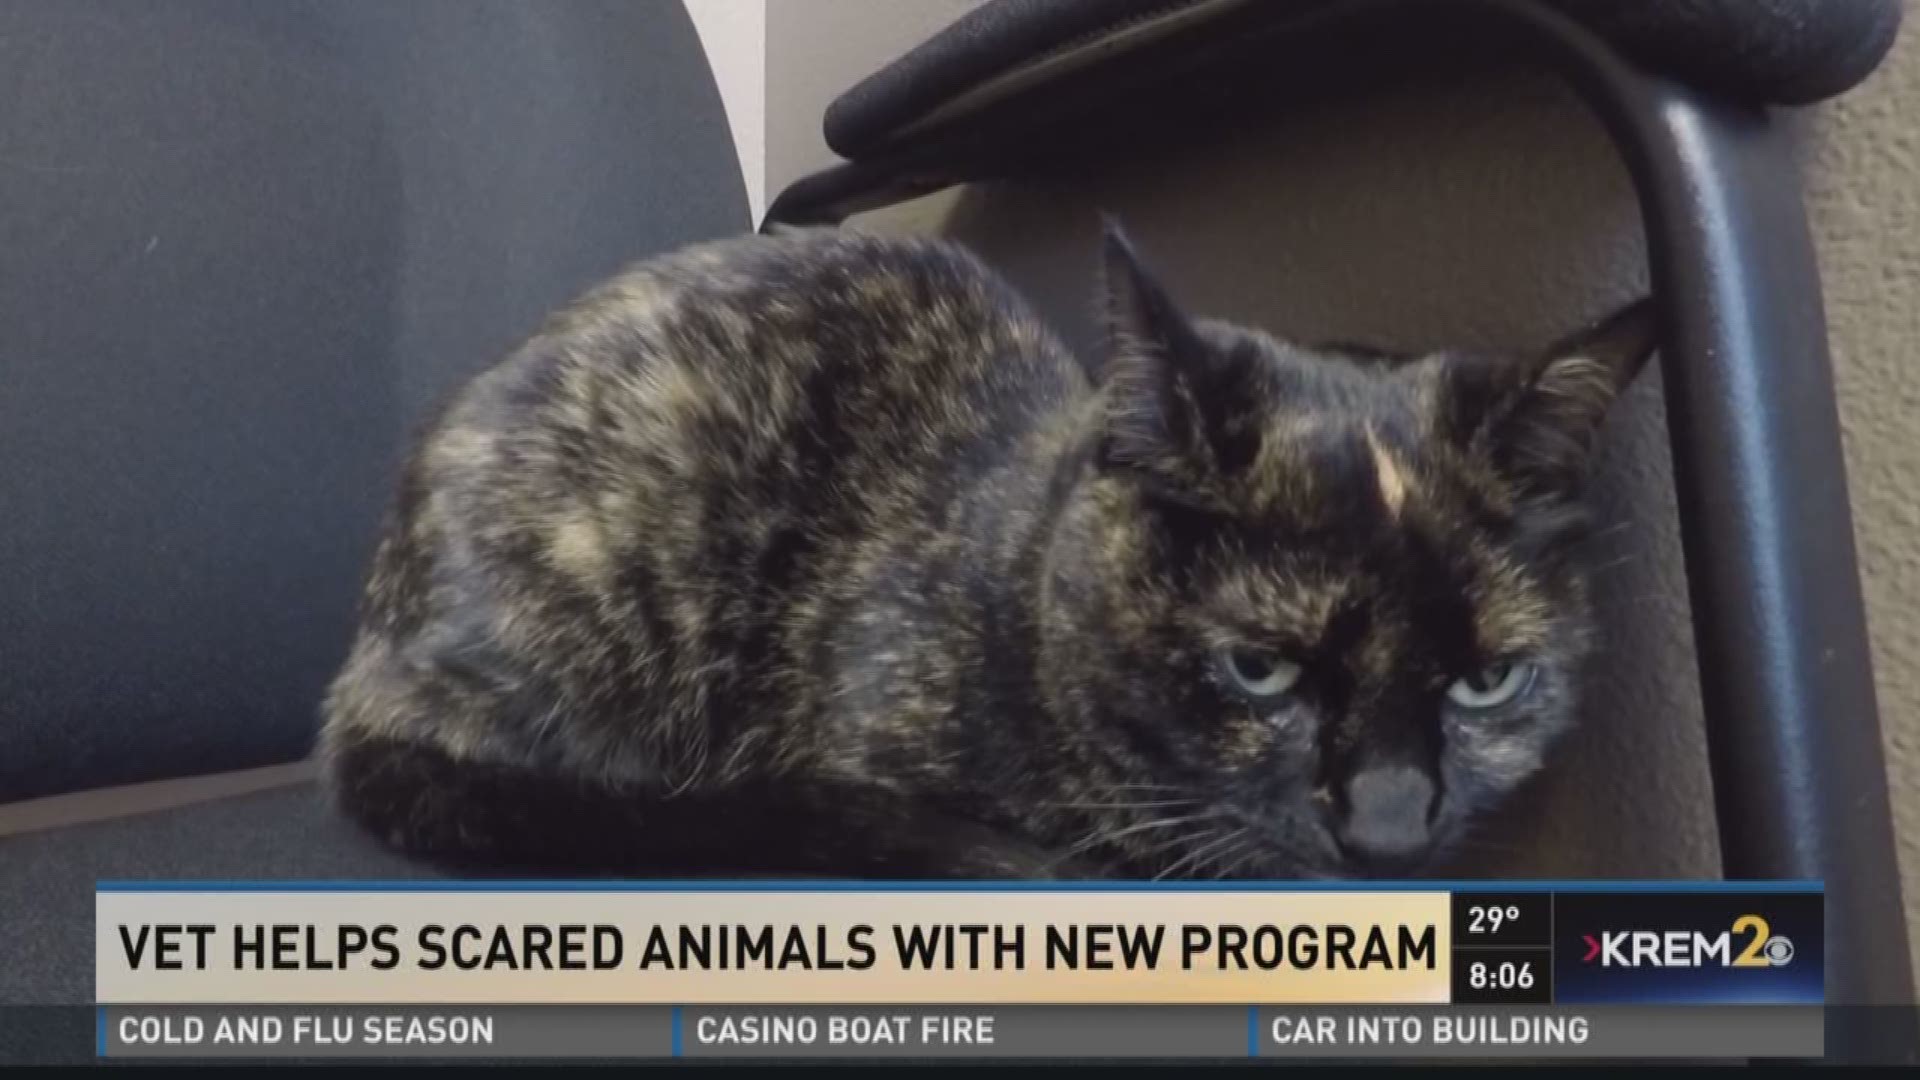 Vet helps scared animals with new program